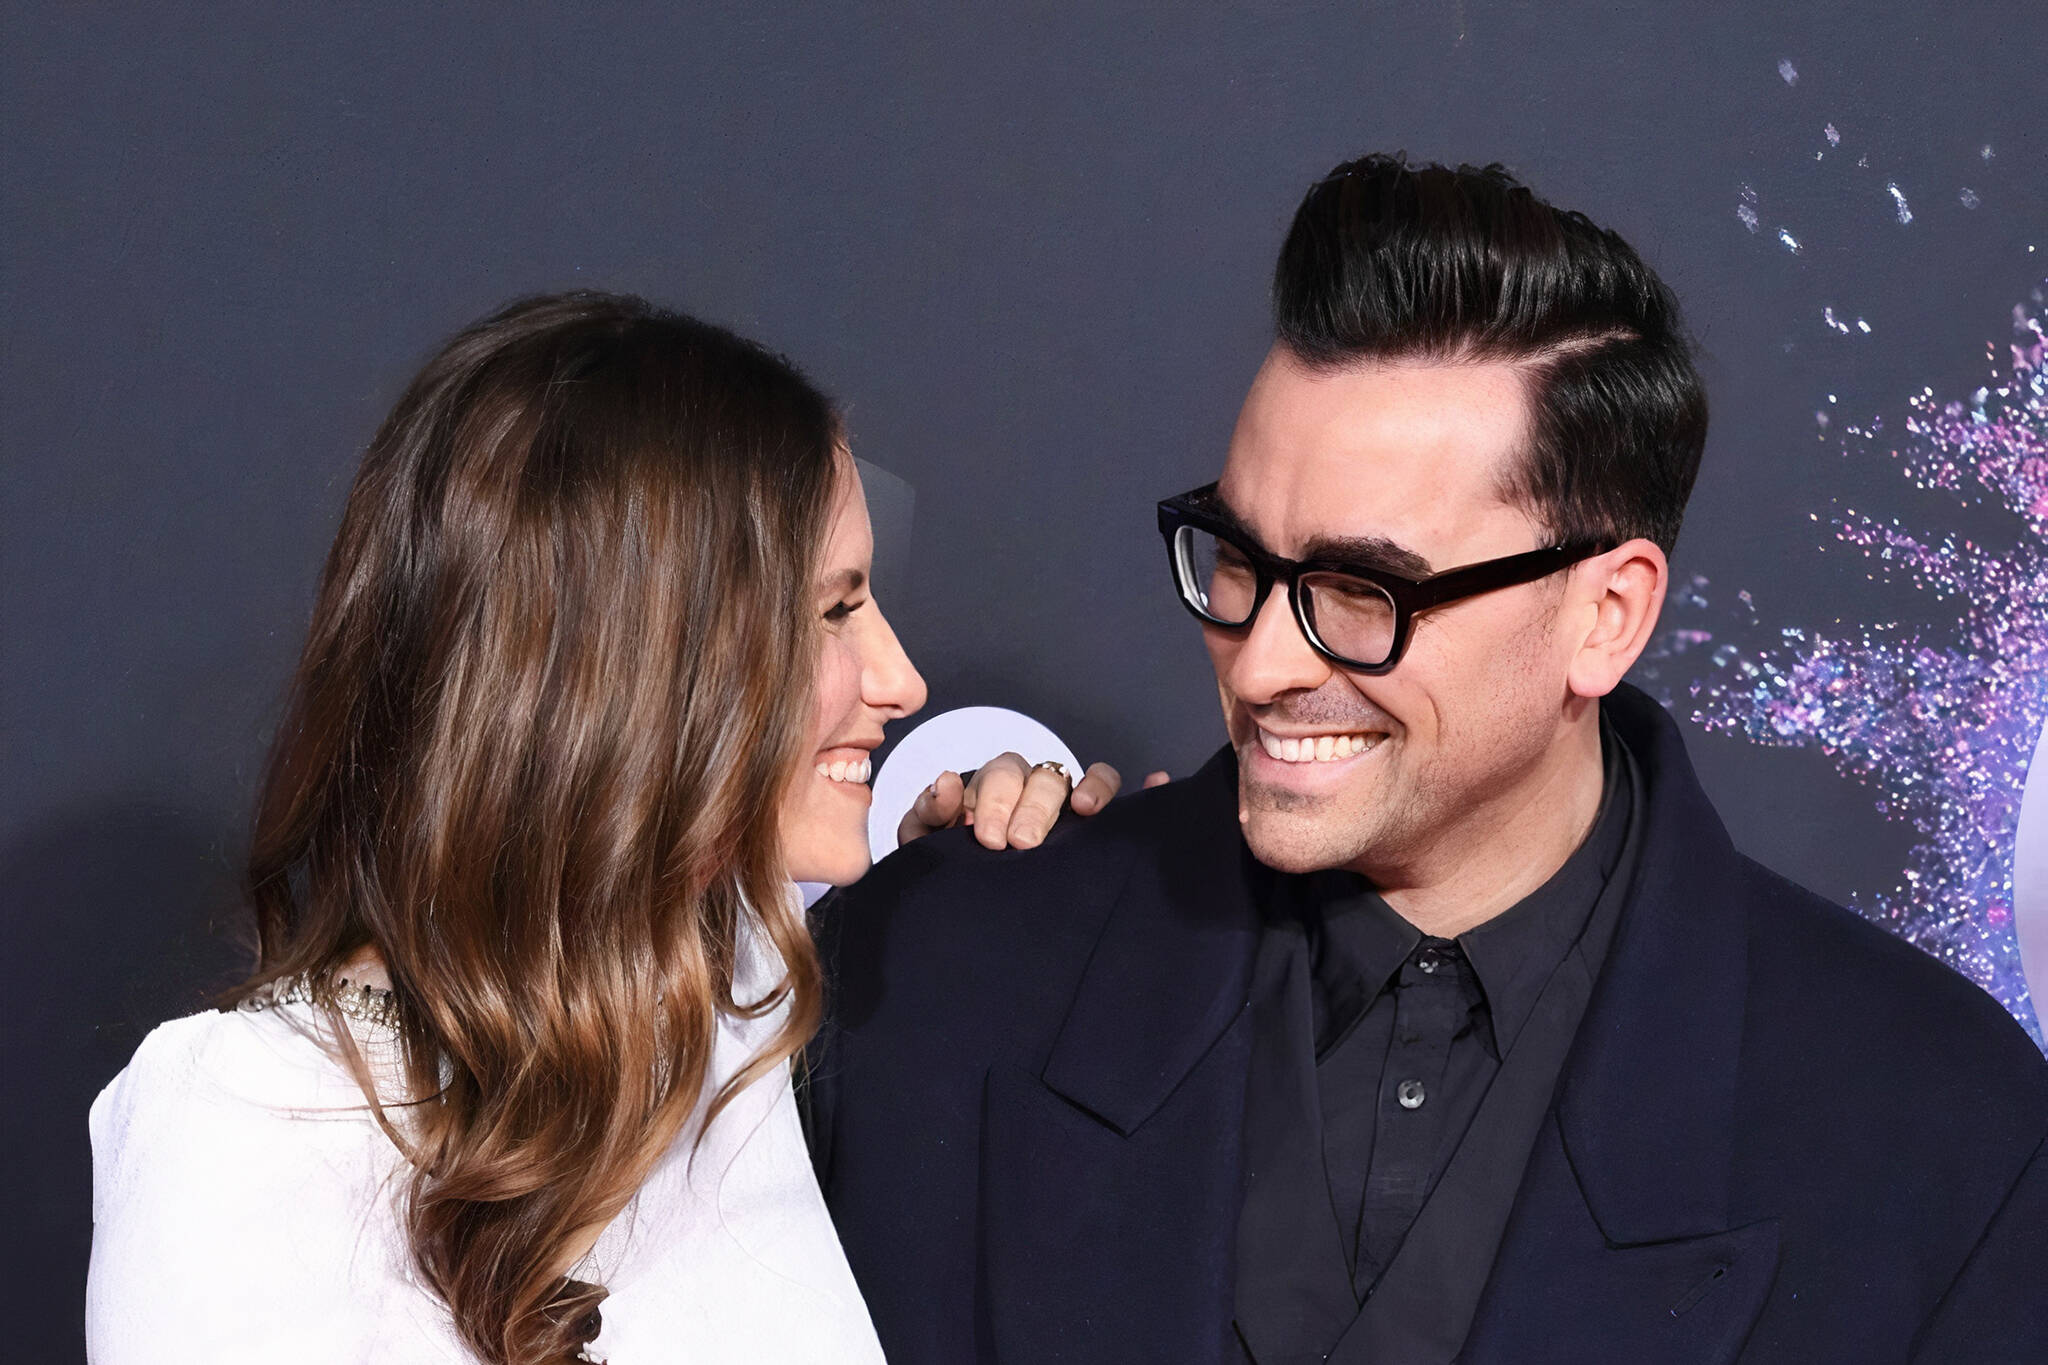 Dan Levy shared an adorable moment from his sister's wedding and fans are  loving it